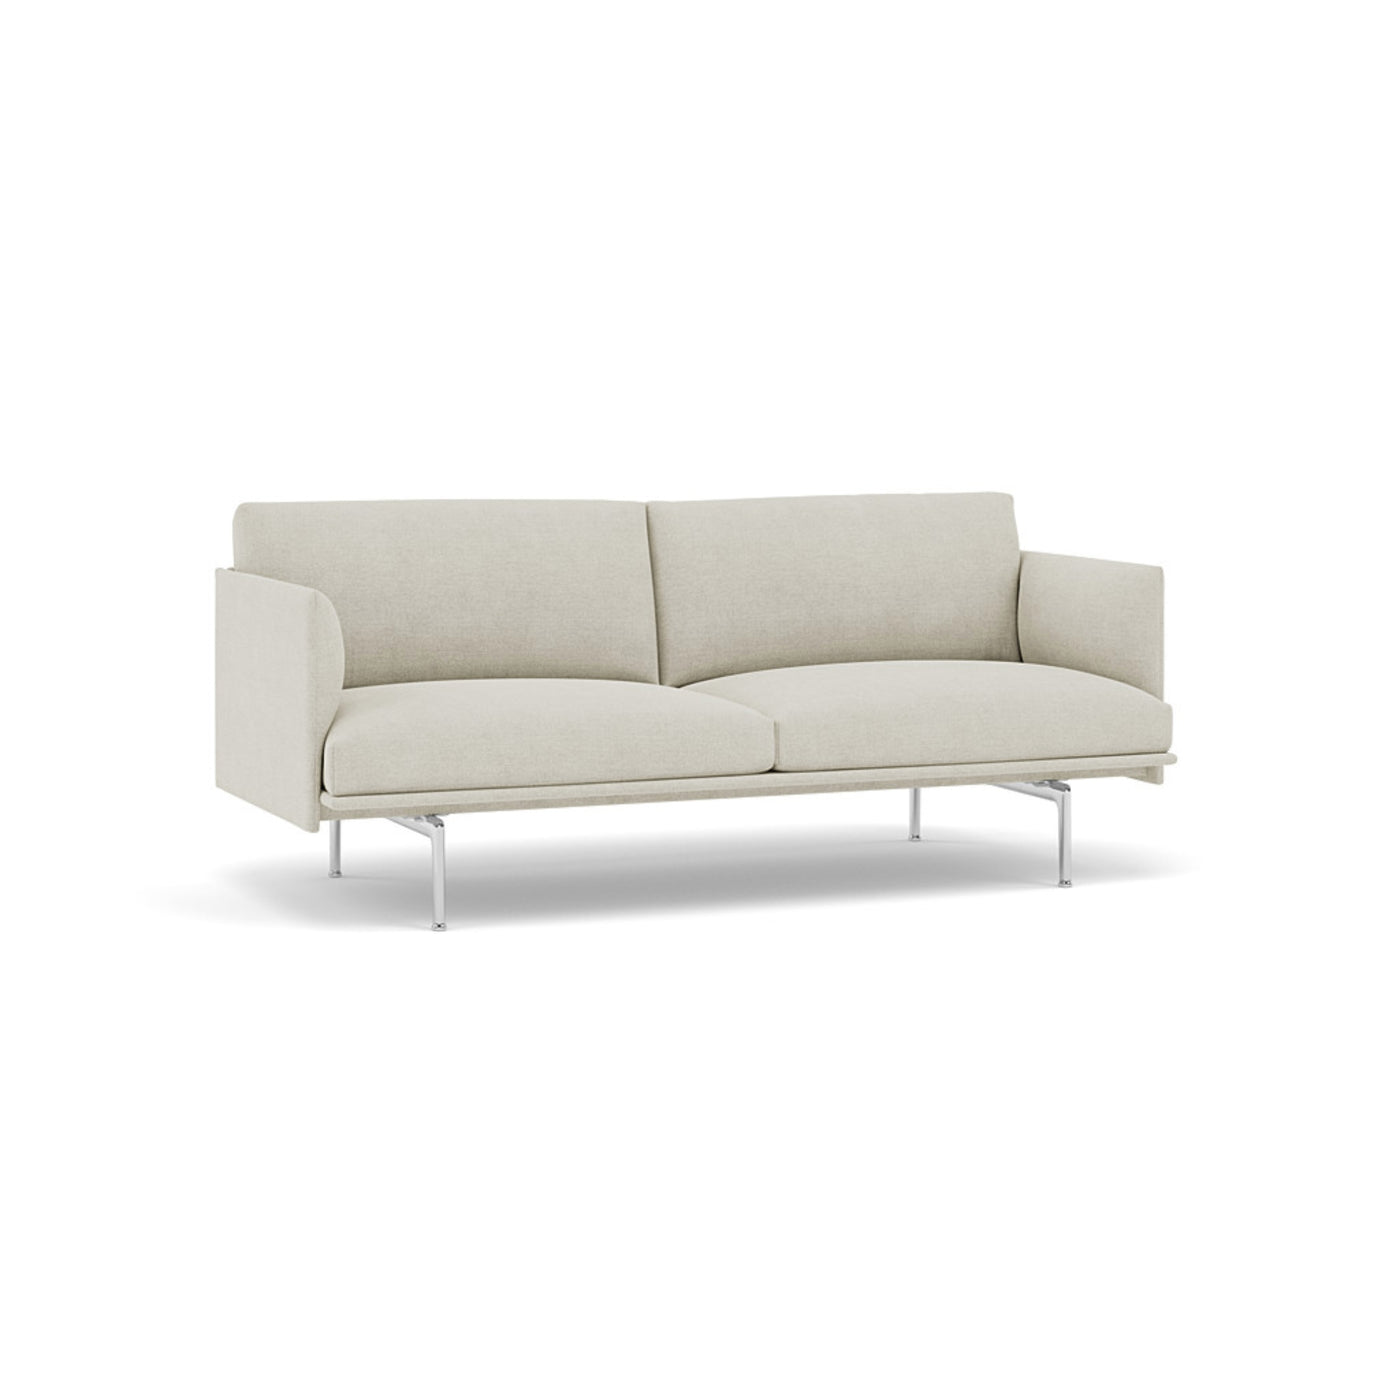 Muuto Outline Studio Sofa. Made to order from someday designs. #colour_fiord-101